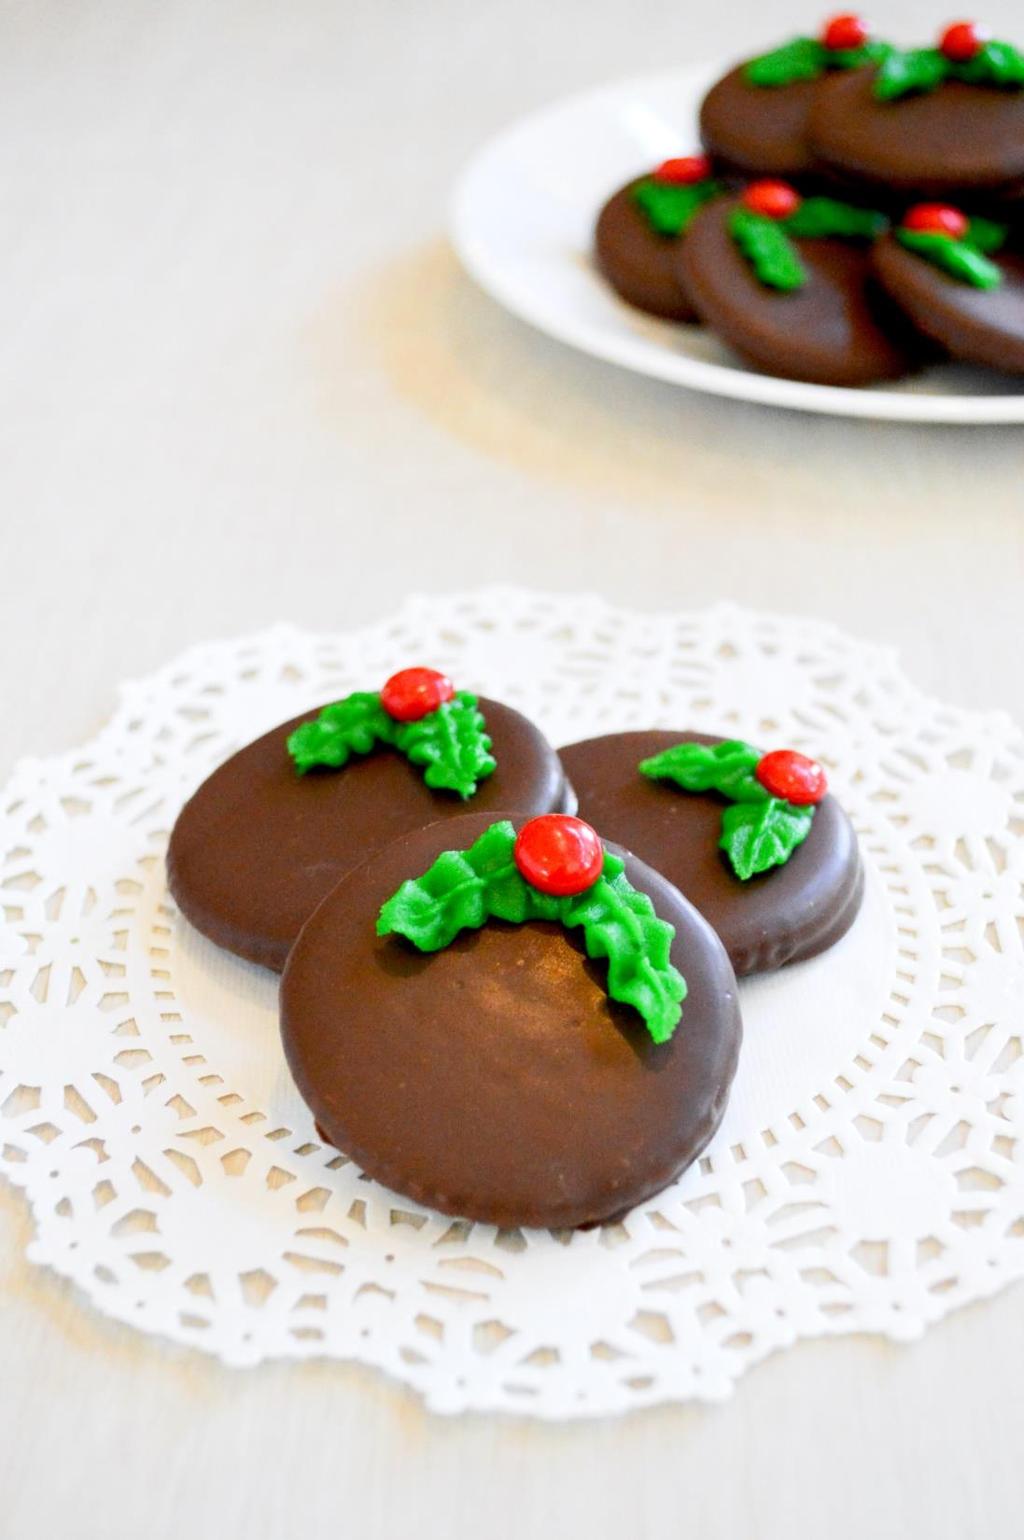 12 ounces chocolate 1 to 4 teaspoons shortening 1/4 teaspoon peppermint oil Approximately 48 round butter crackers Green decorating frosting Cinnamon red hot candies Melt the chocolates and 1